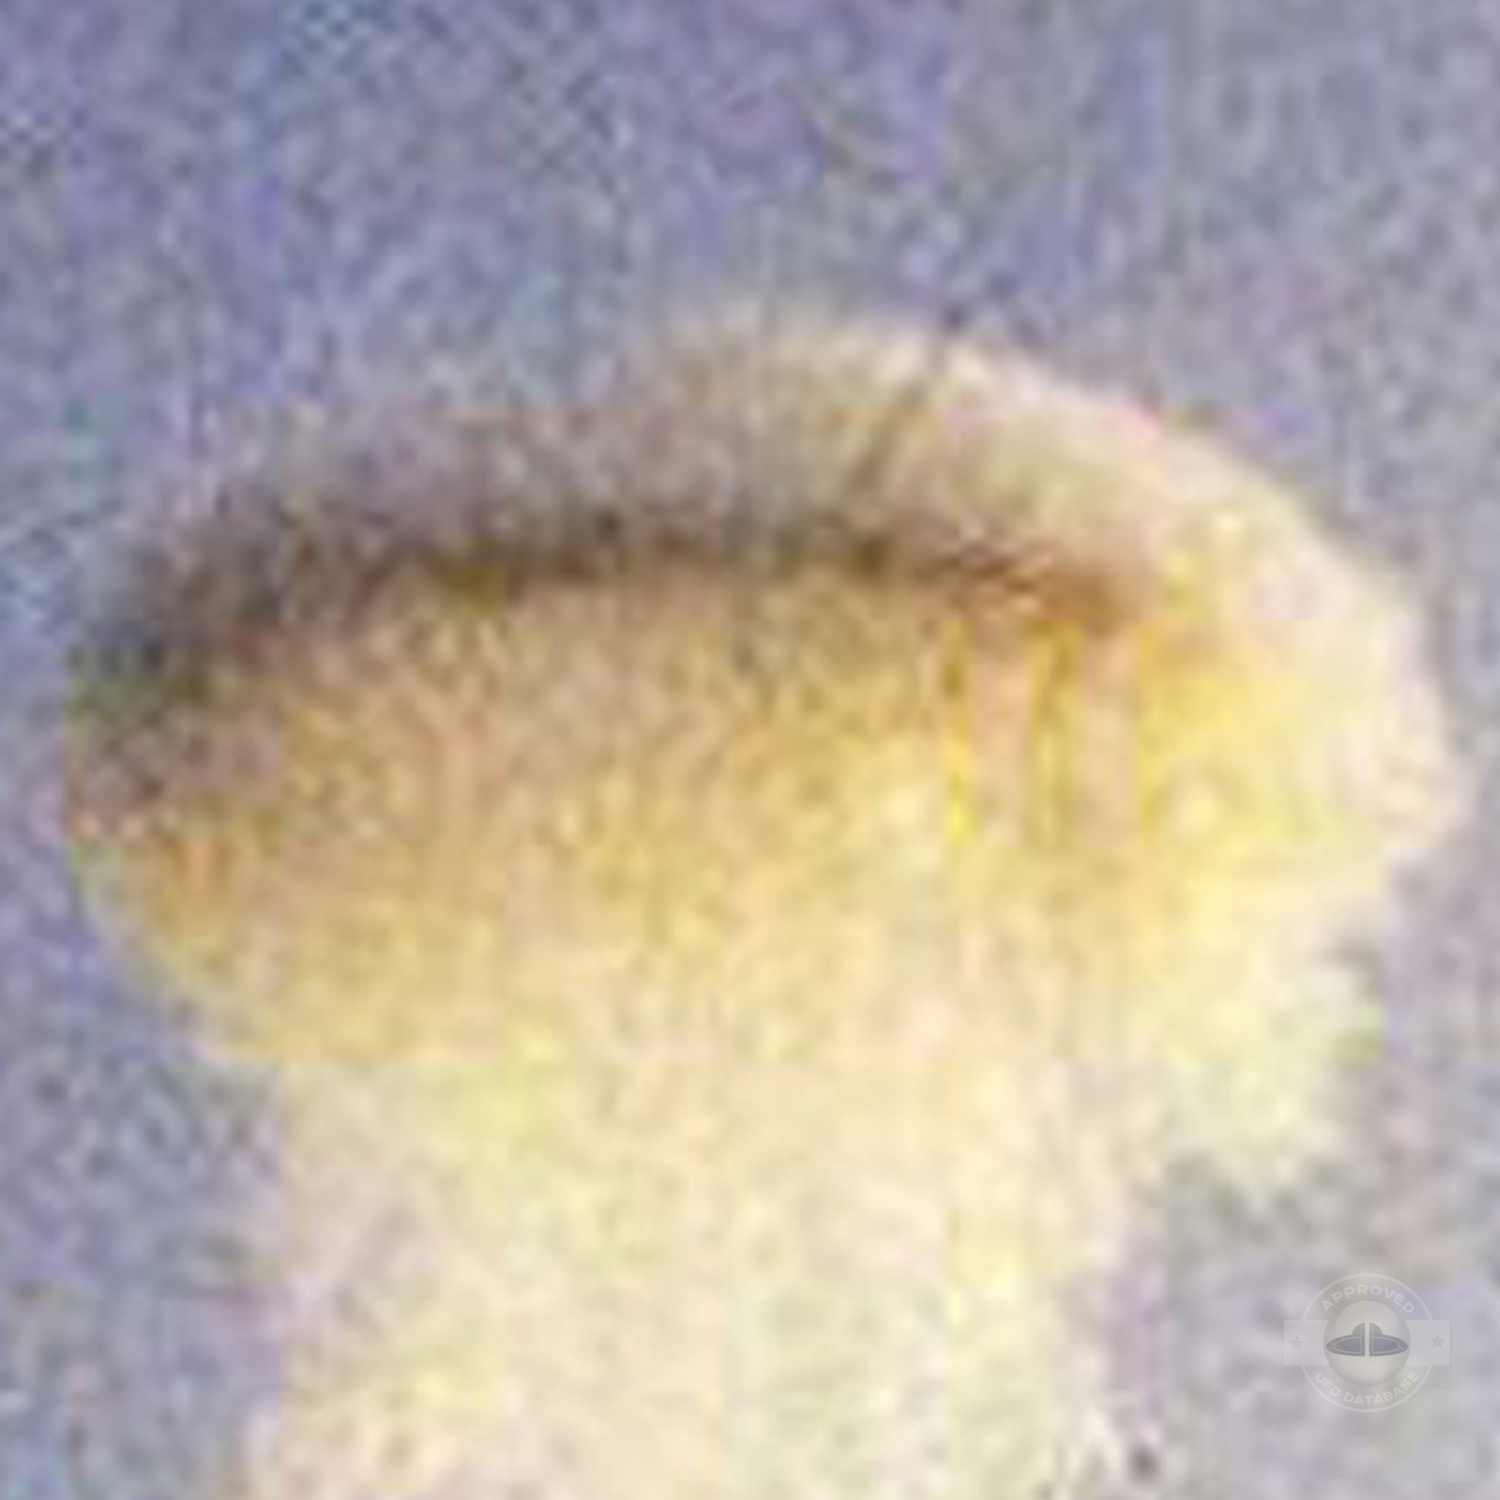 Best UFO picture showing UFO in Cloud disguise | Viborg, Denmark 1974 UFO Picture #222-5